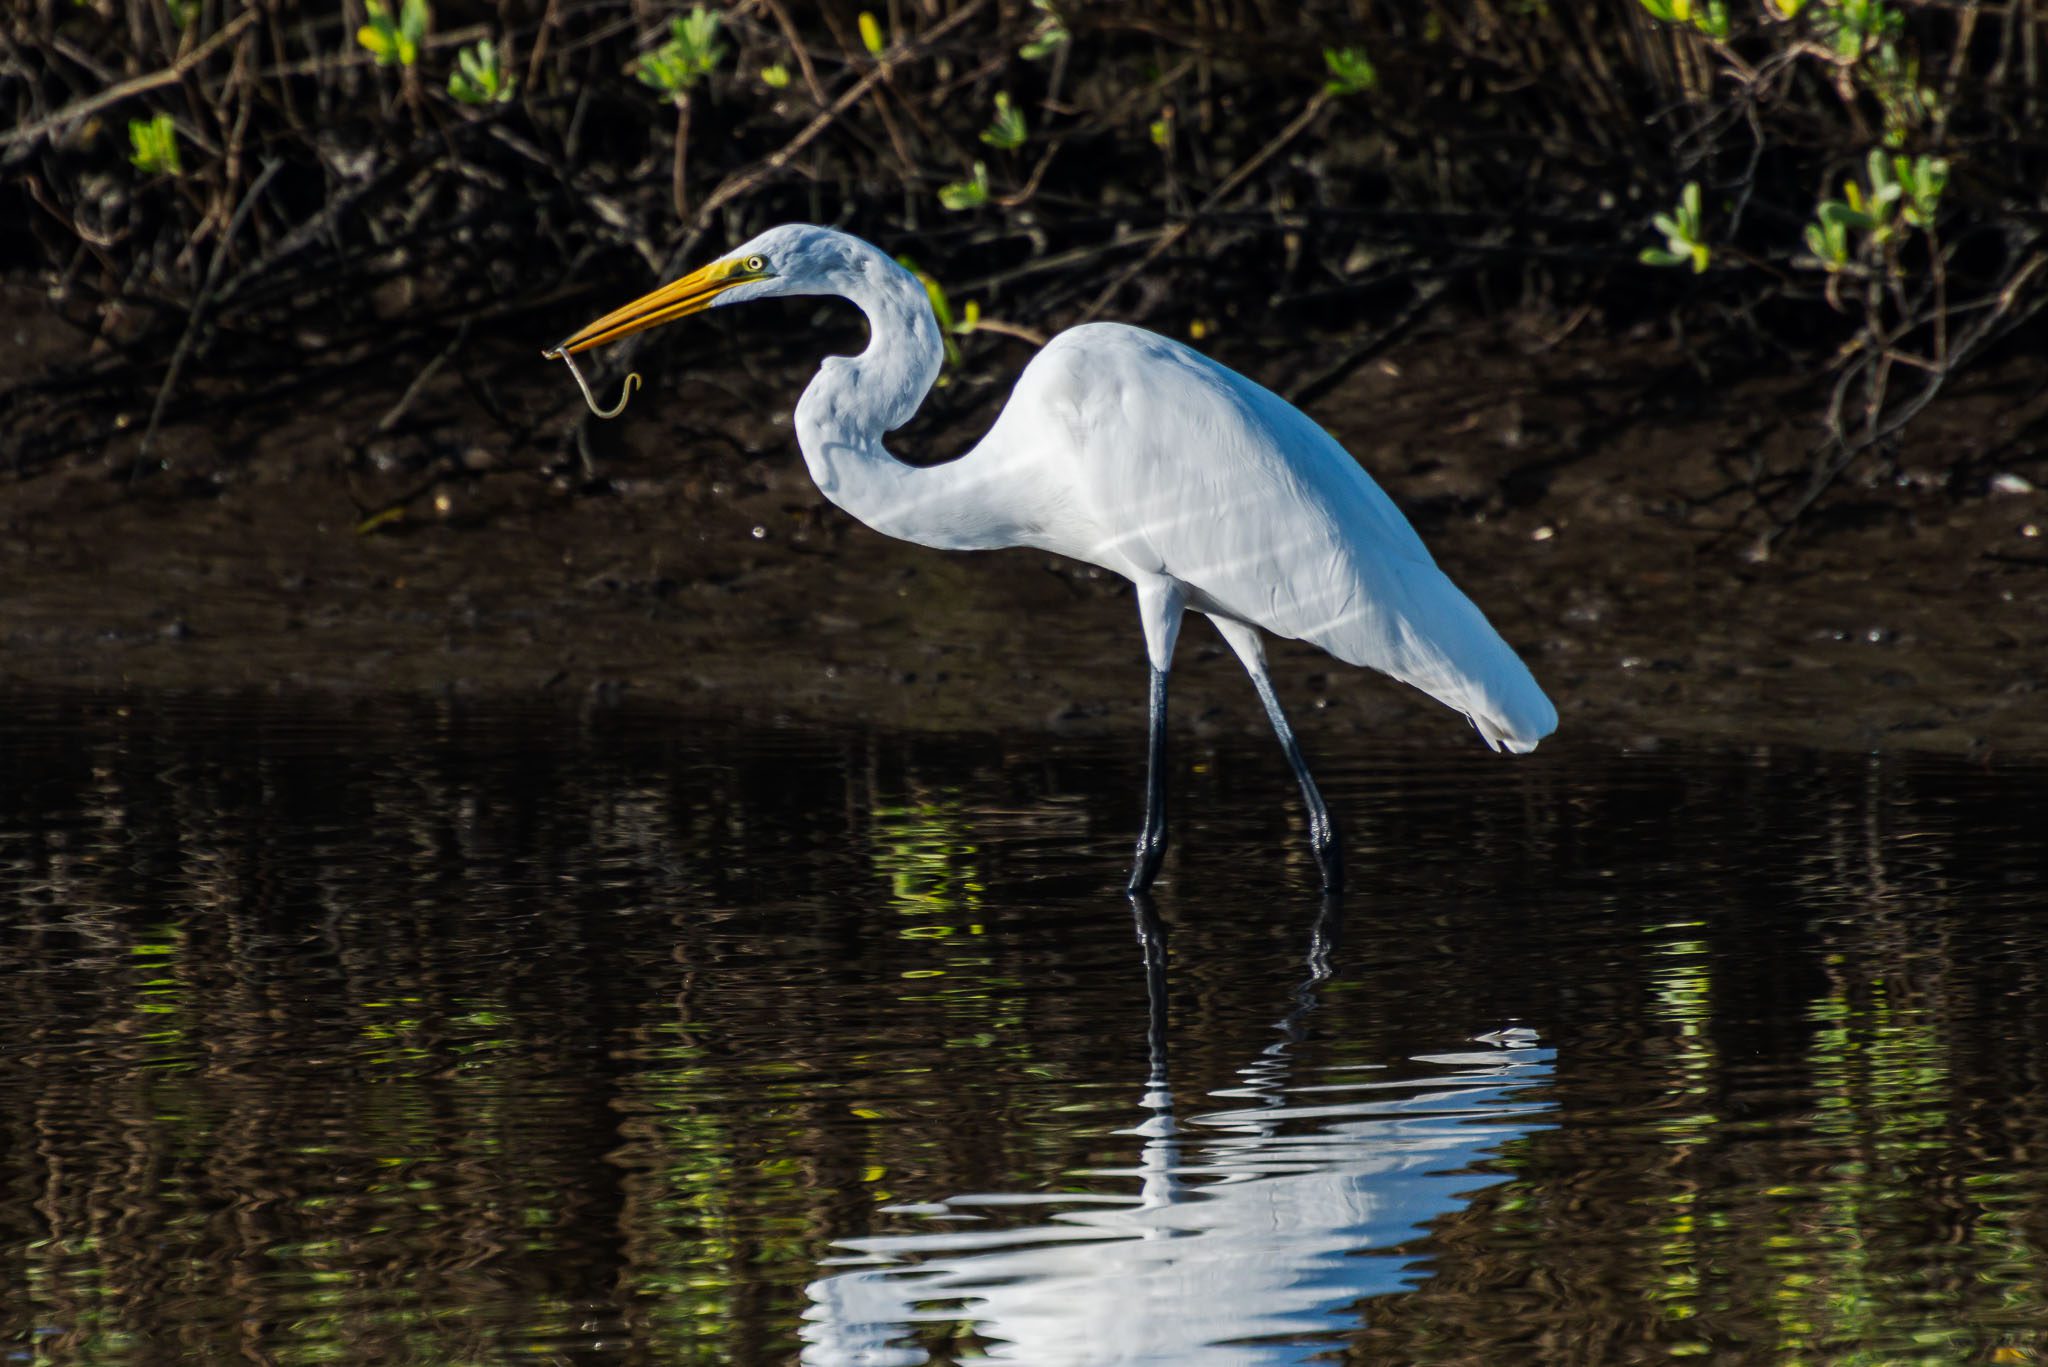 Great egret catching an eel to eat. These shorebirds are usually spotted during Viking EcoTours morning kayak tours in Canaveral National Seashore.